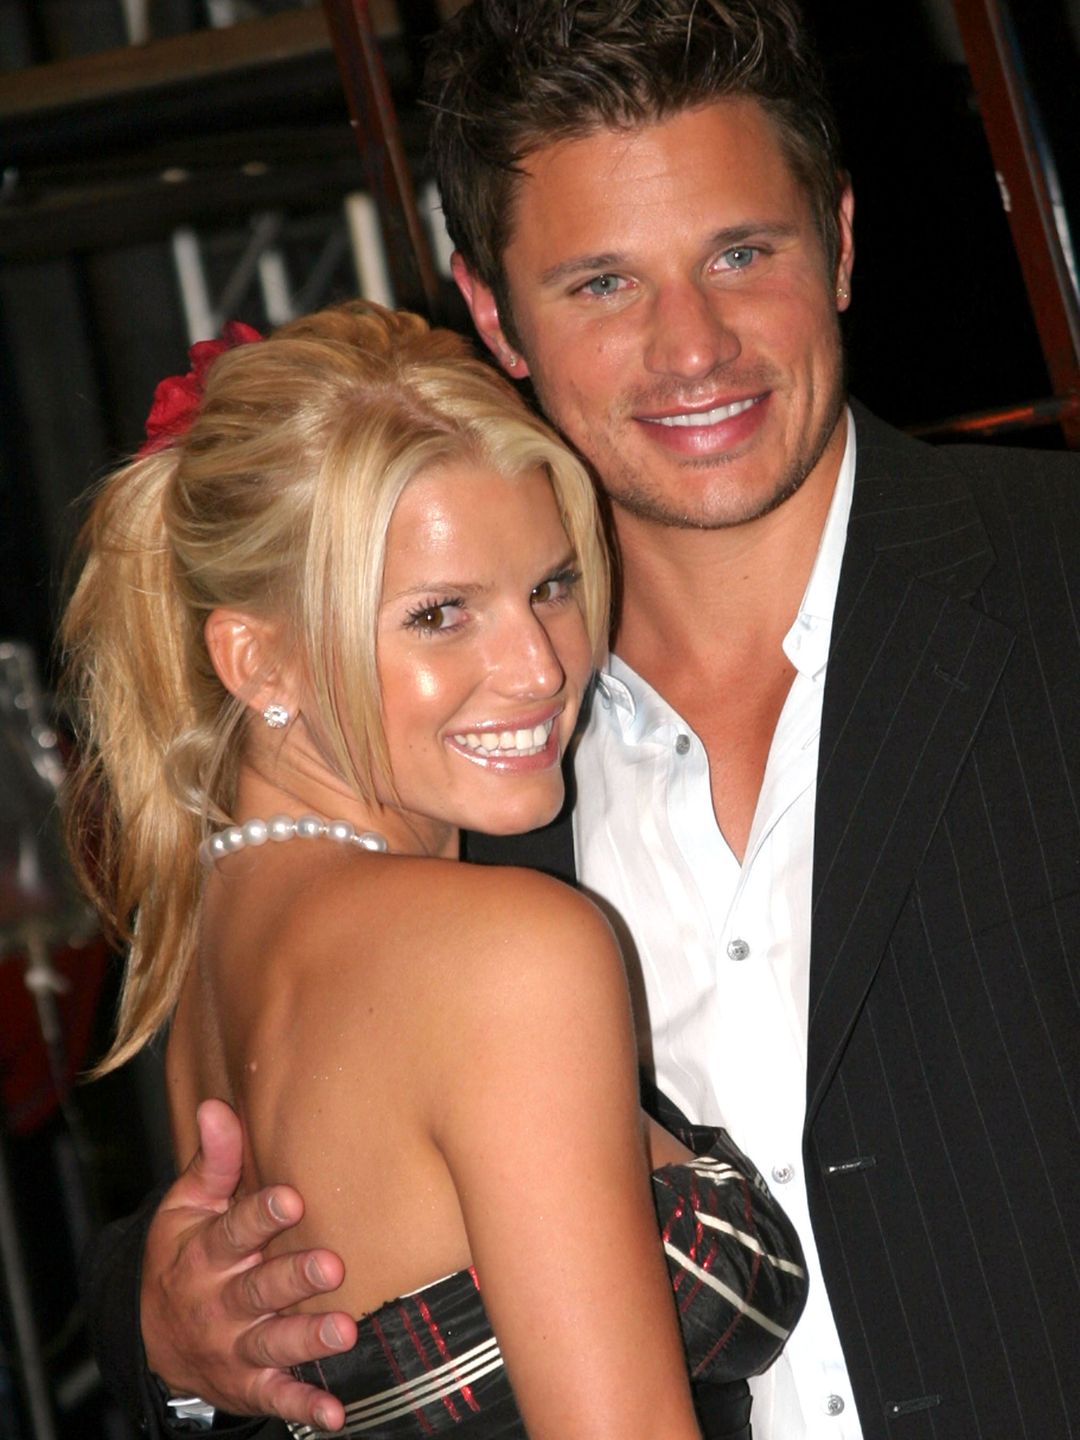 Nick Lachey and Jessica Simpson Reality TV Show Moments